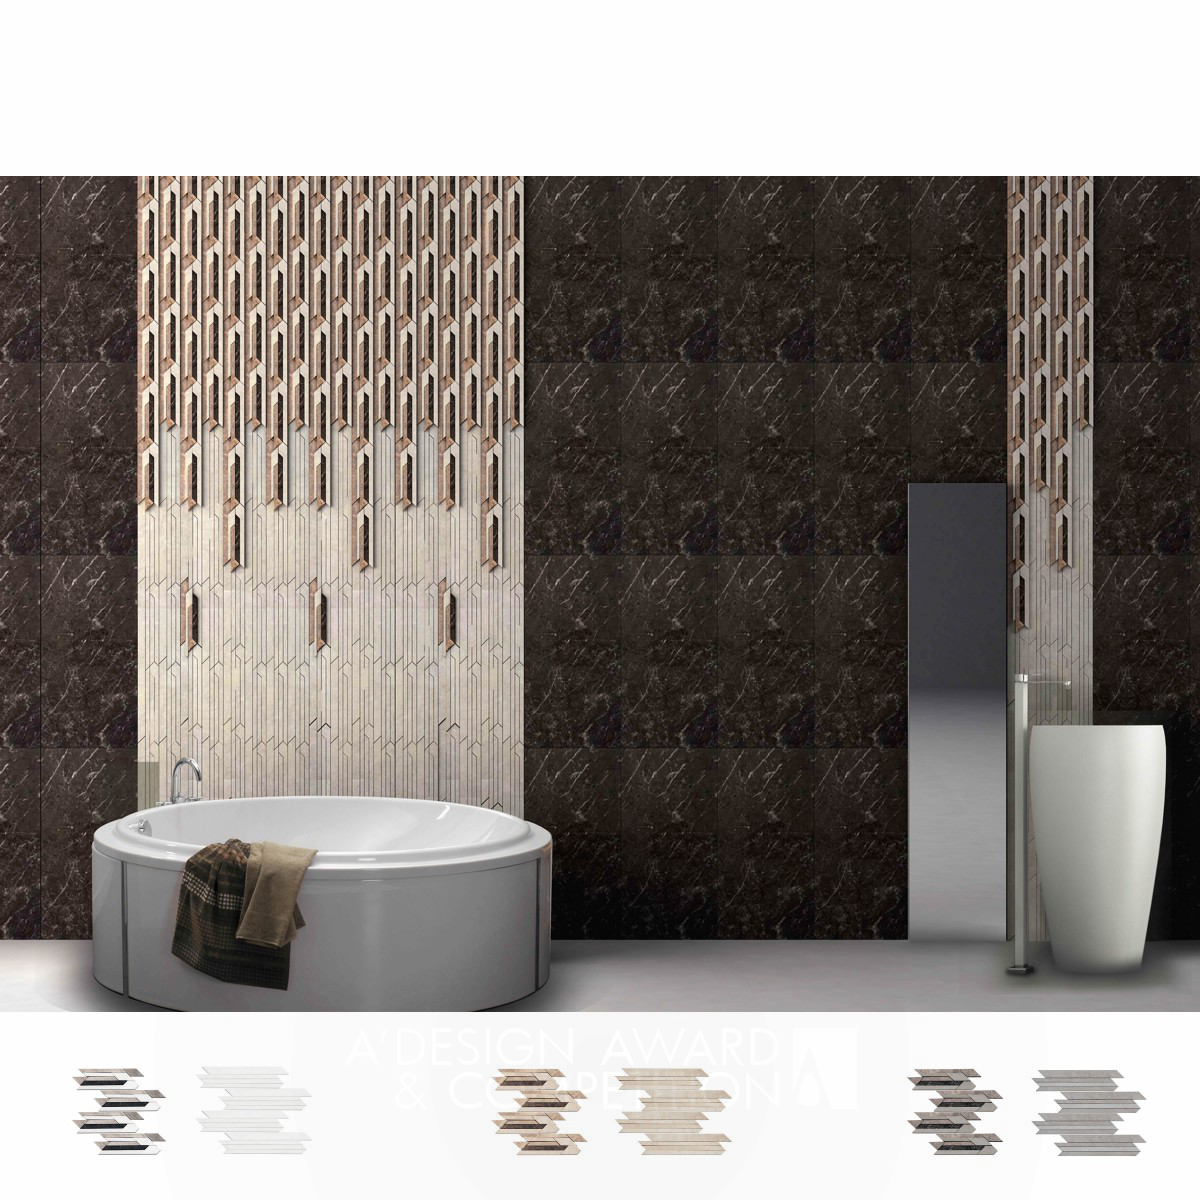 STONE & MORE Decorative Natural Wall Lining  by Sule Koc